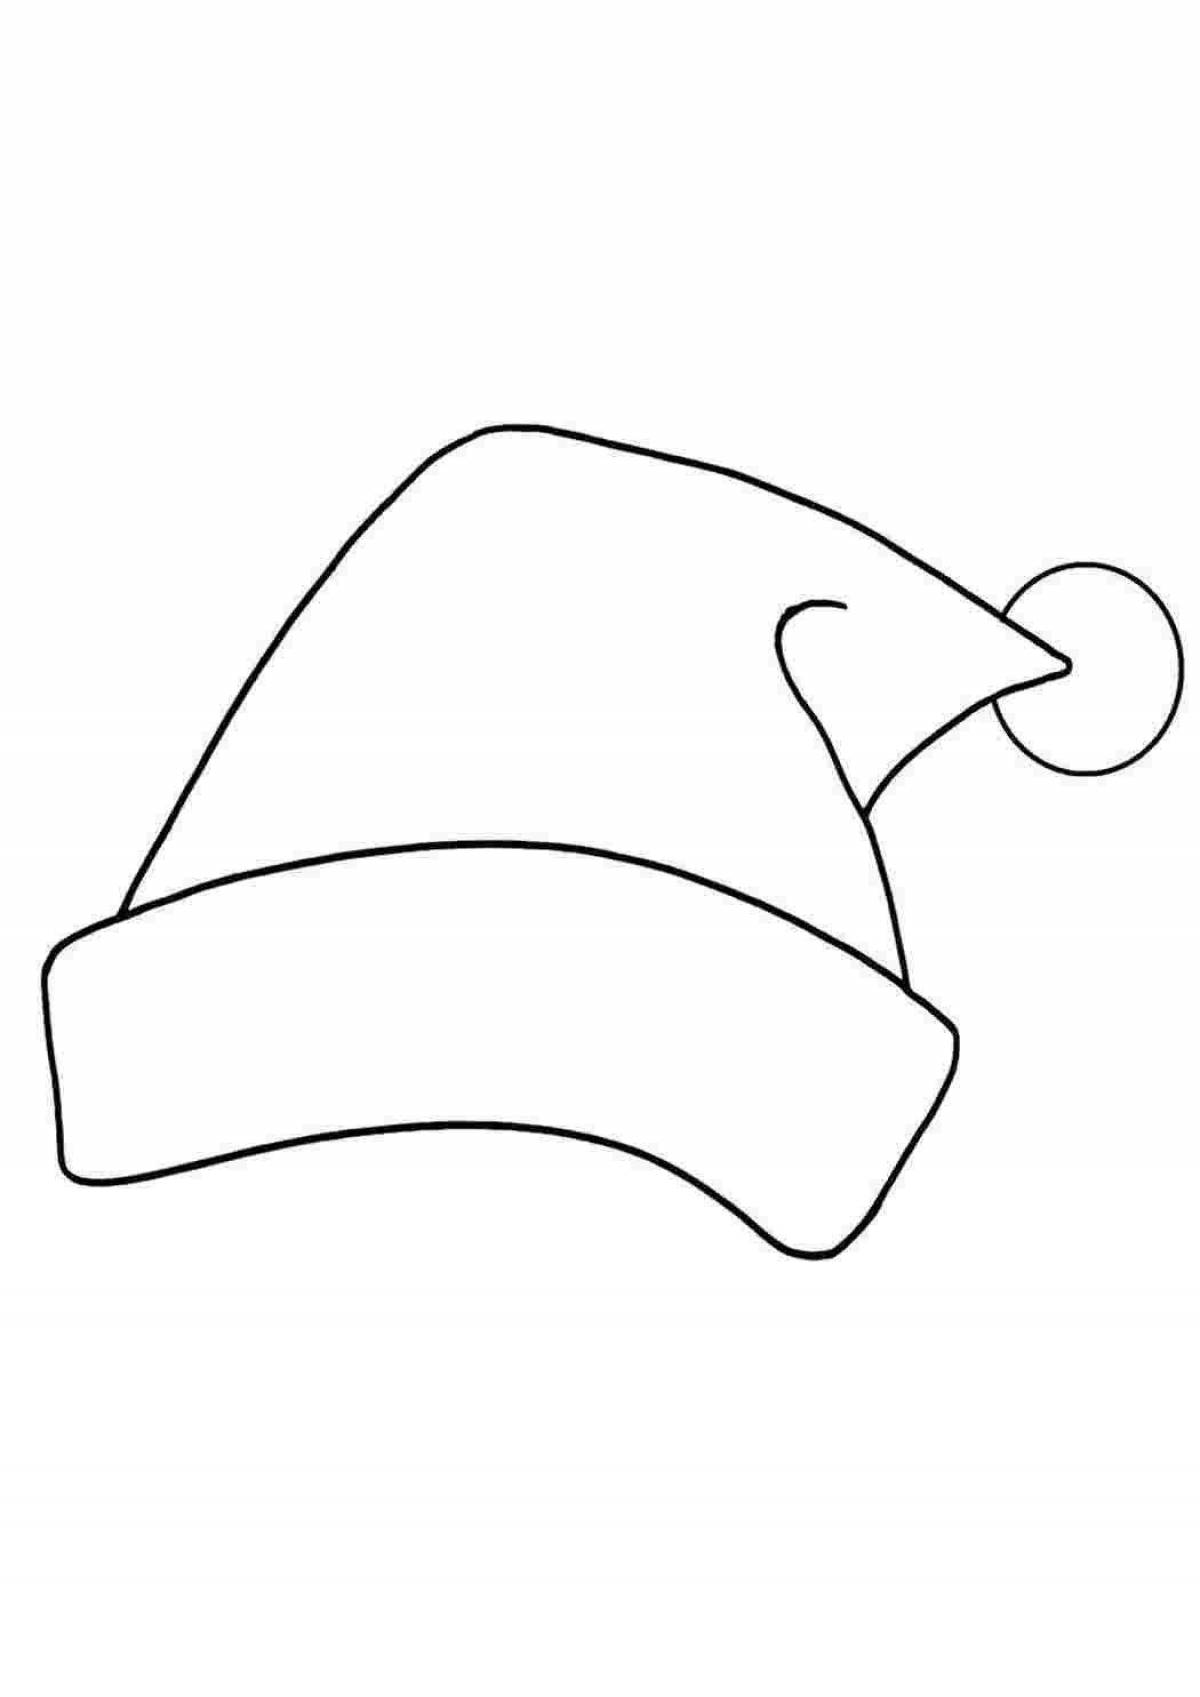 Coloring hat for children 4-5 years old